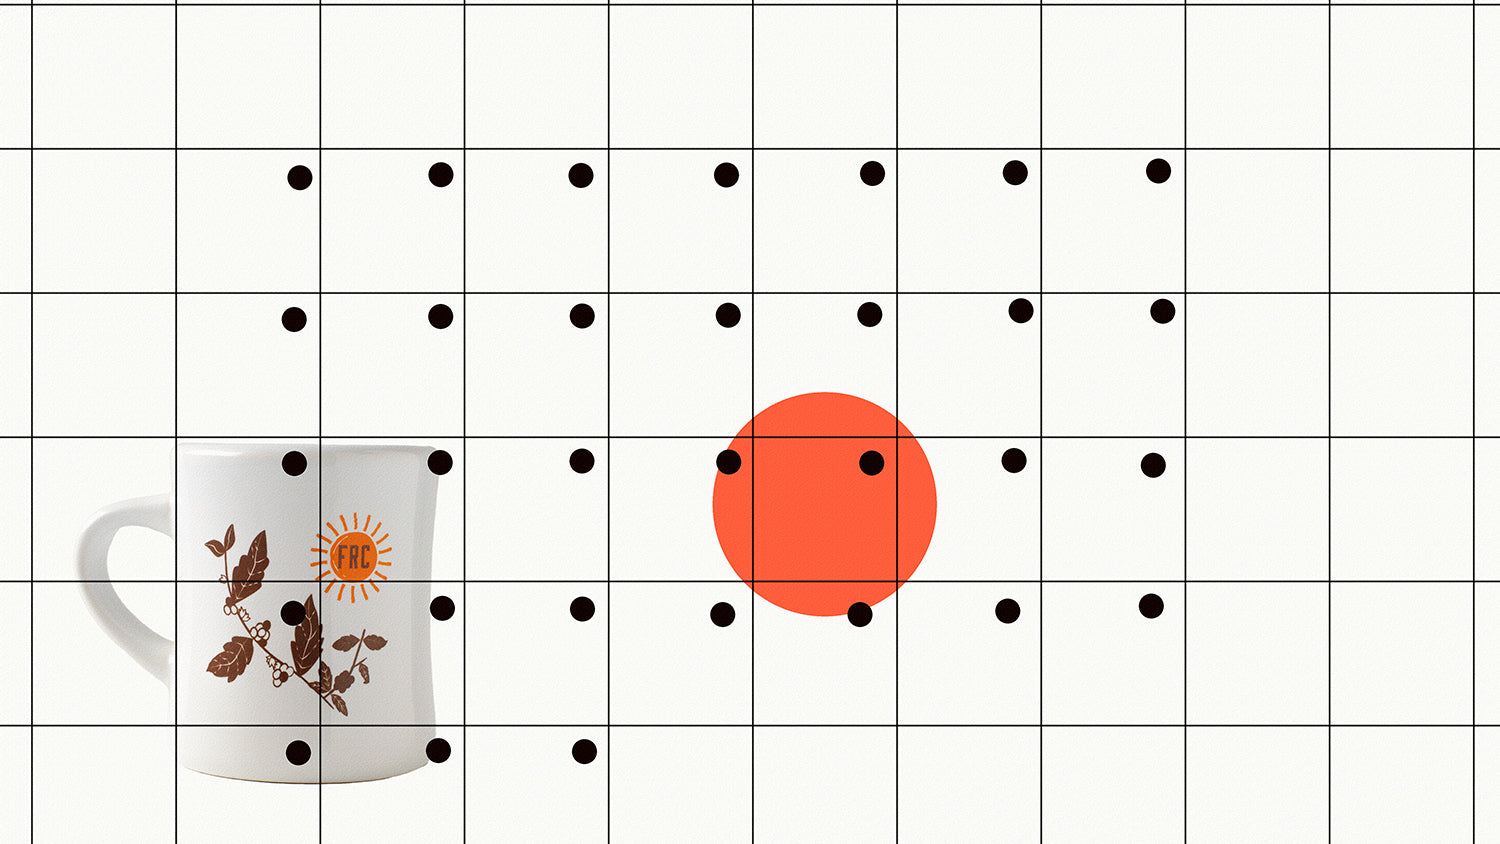 An minimalist calendar with a red dot on a date and a coffee mug in the background.